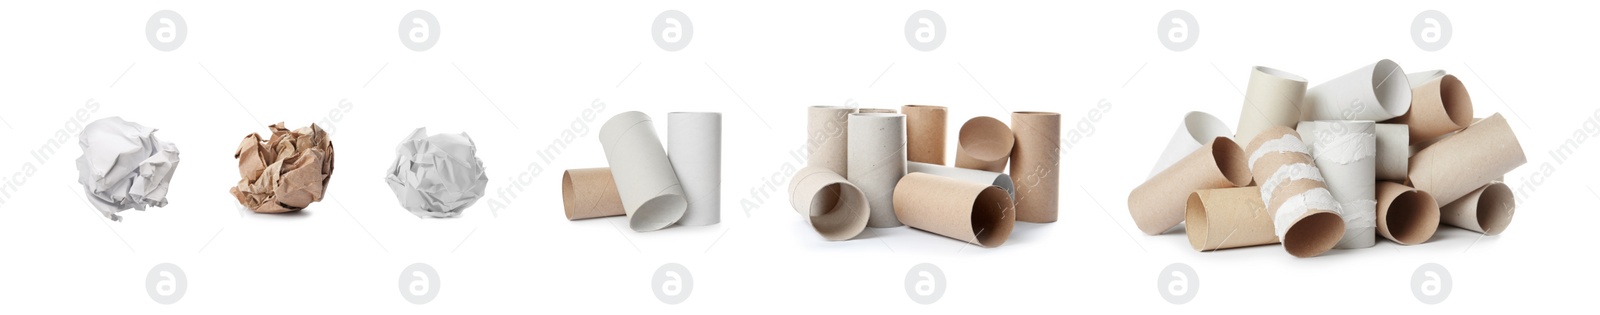 Image of Set of cardboard garbage on white background, banner design. Waste management and recycling